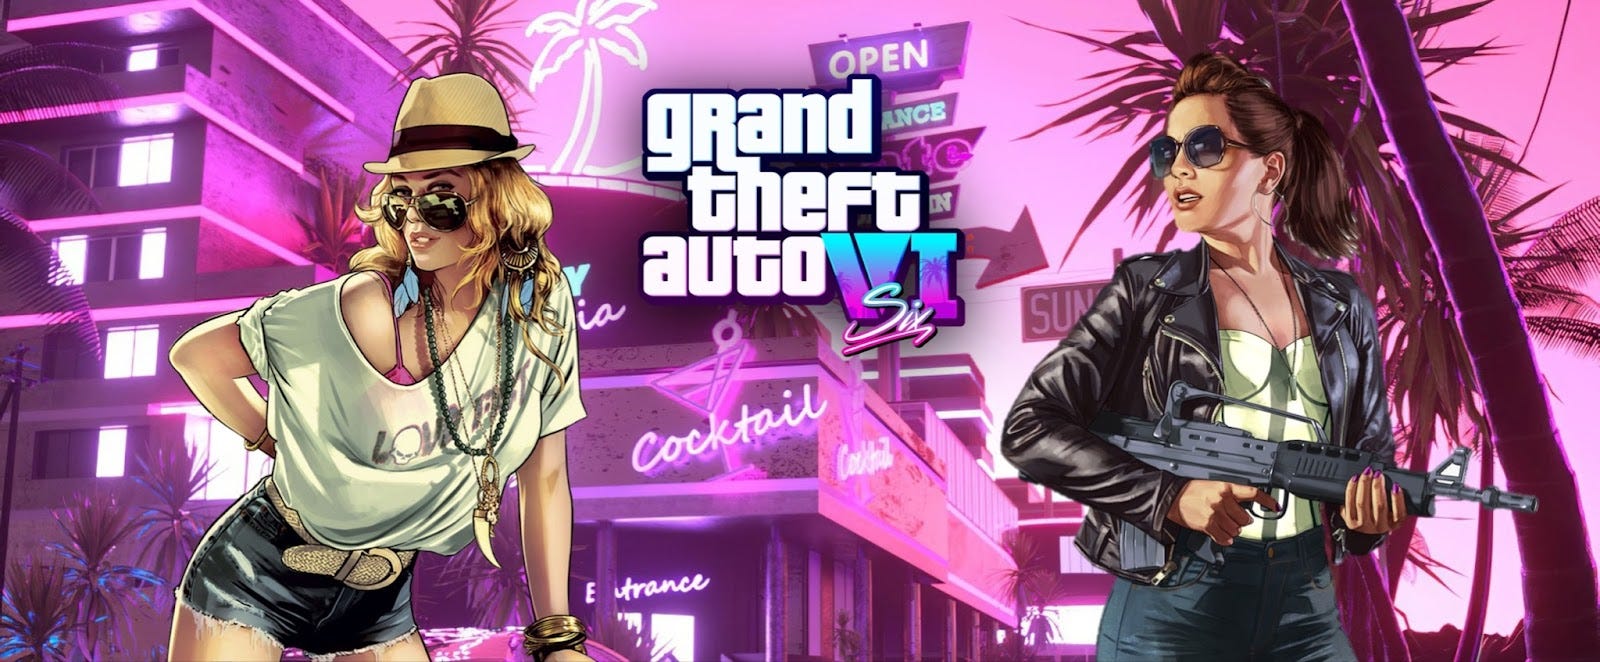 Rockstar Games has a good reason for delaying Grand Theft Auto 6